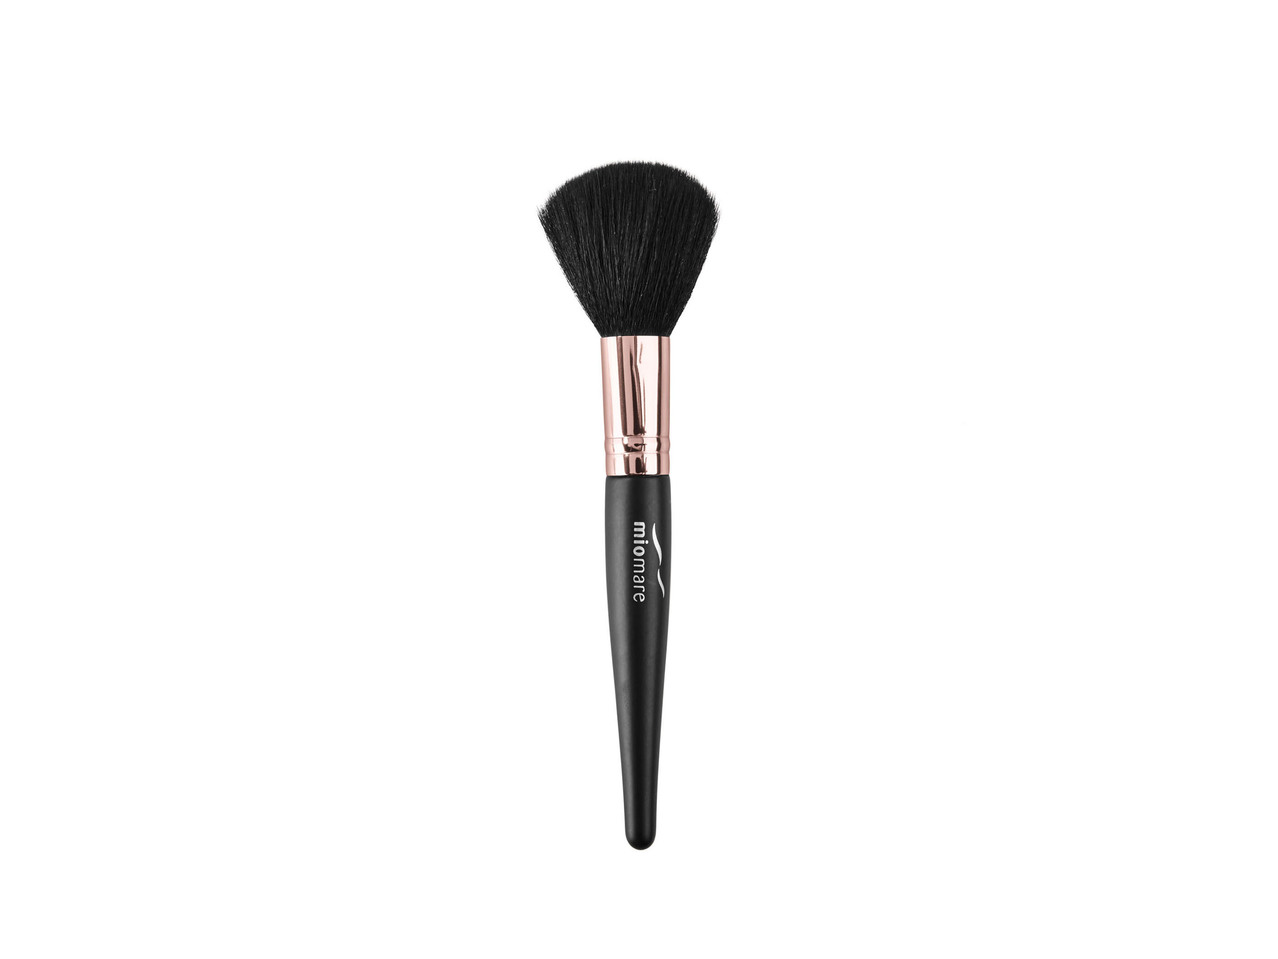 Make-Up Brushes or Make-Up Accessories